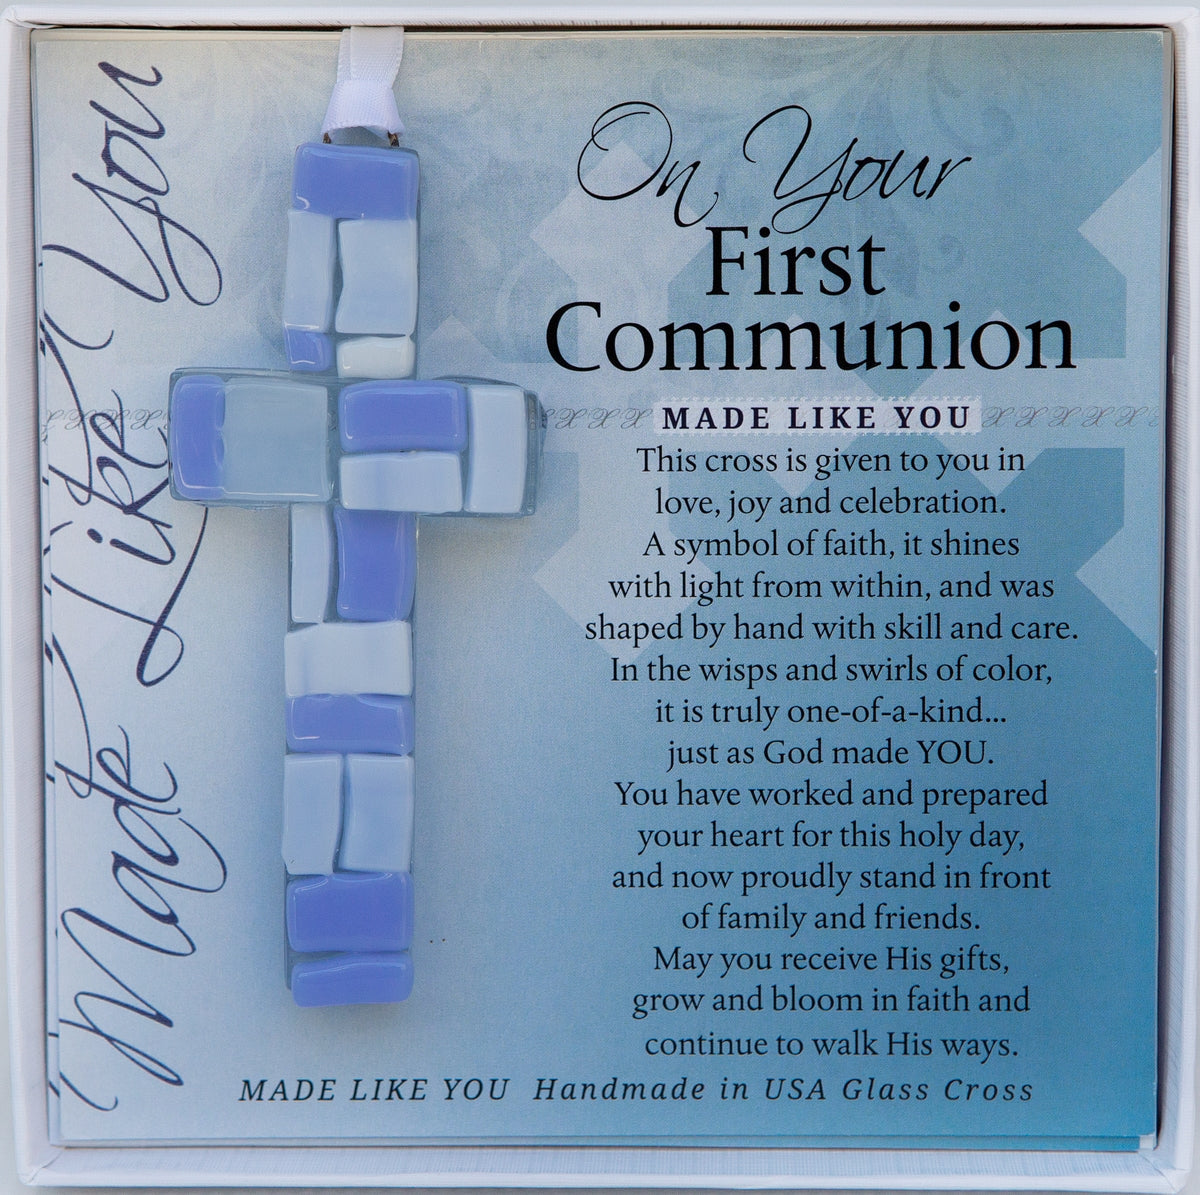 First Communion Gift - Handmade 4" blue mosaic glass cross and "On Your First Communion" sentiment in white box with clear lid.